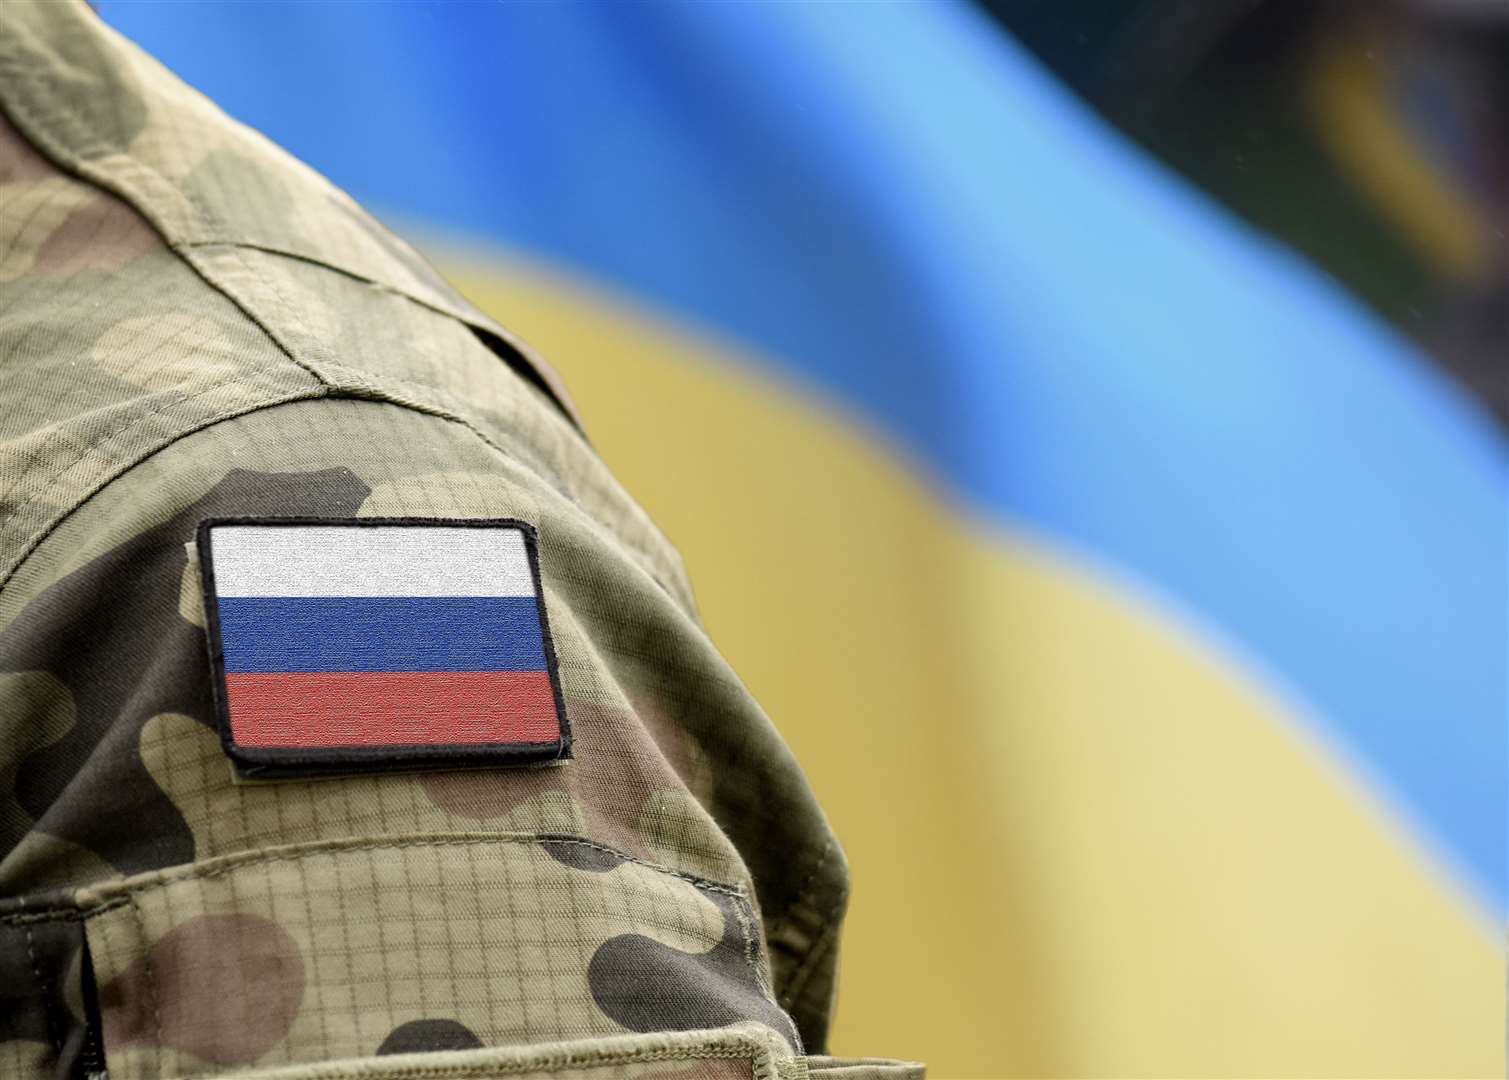 The Liberal Democrats are proposing the use of proscription orders against Russia's military units and mercenaries.